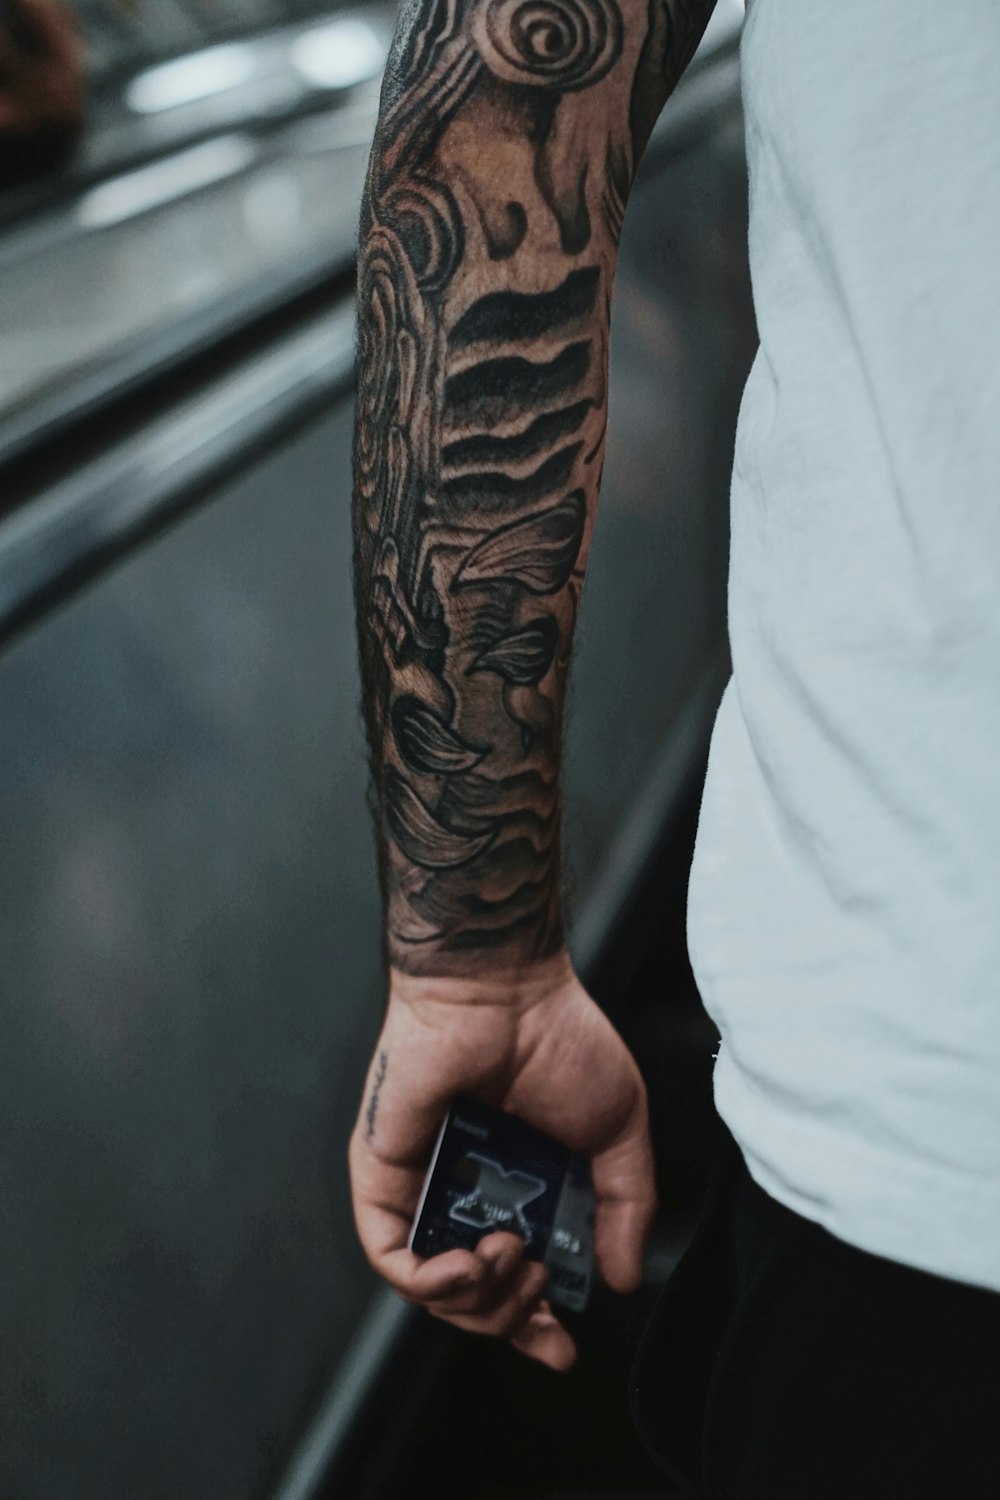 Tattoo Arm Pictures | Download Free Images on Unsplash